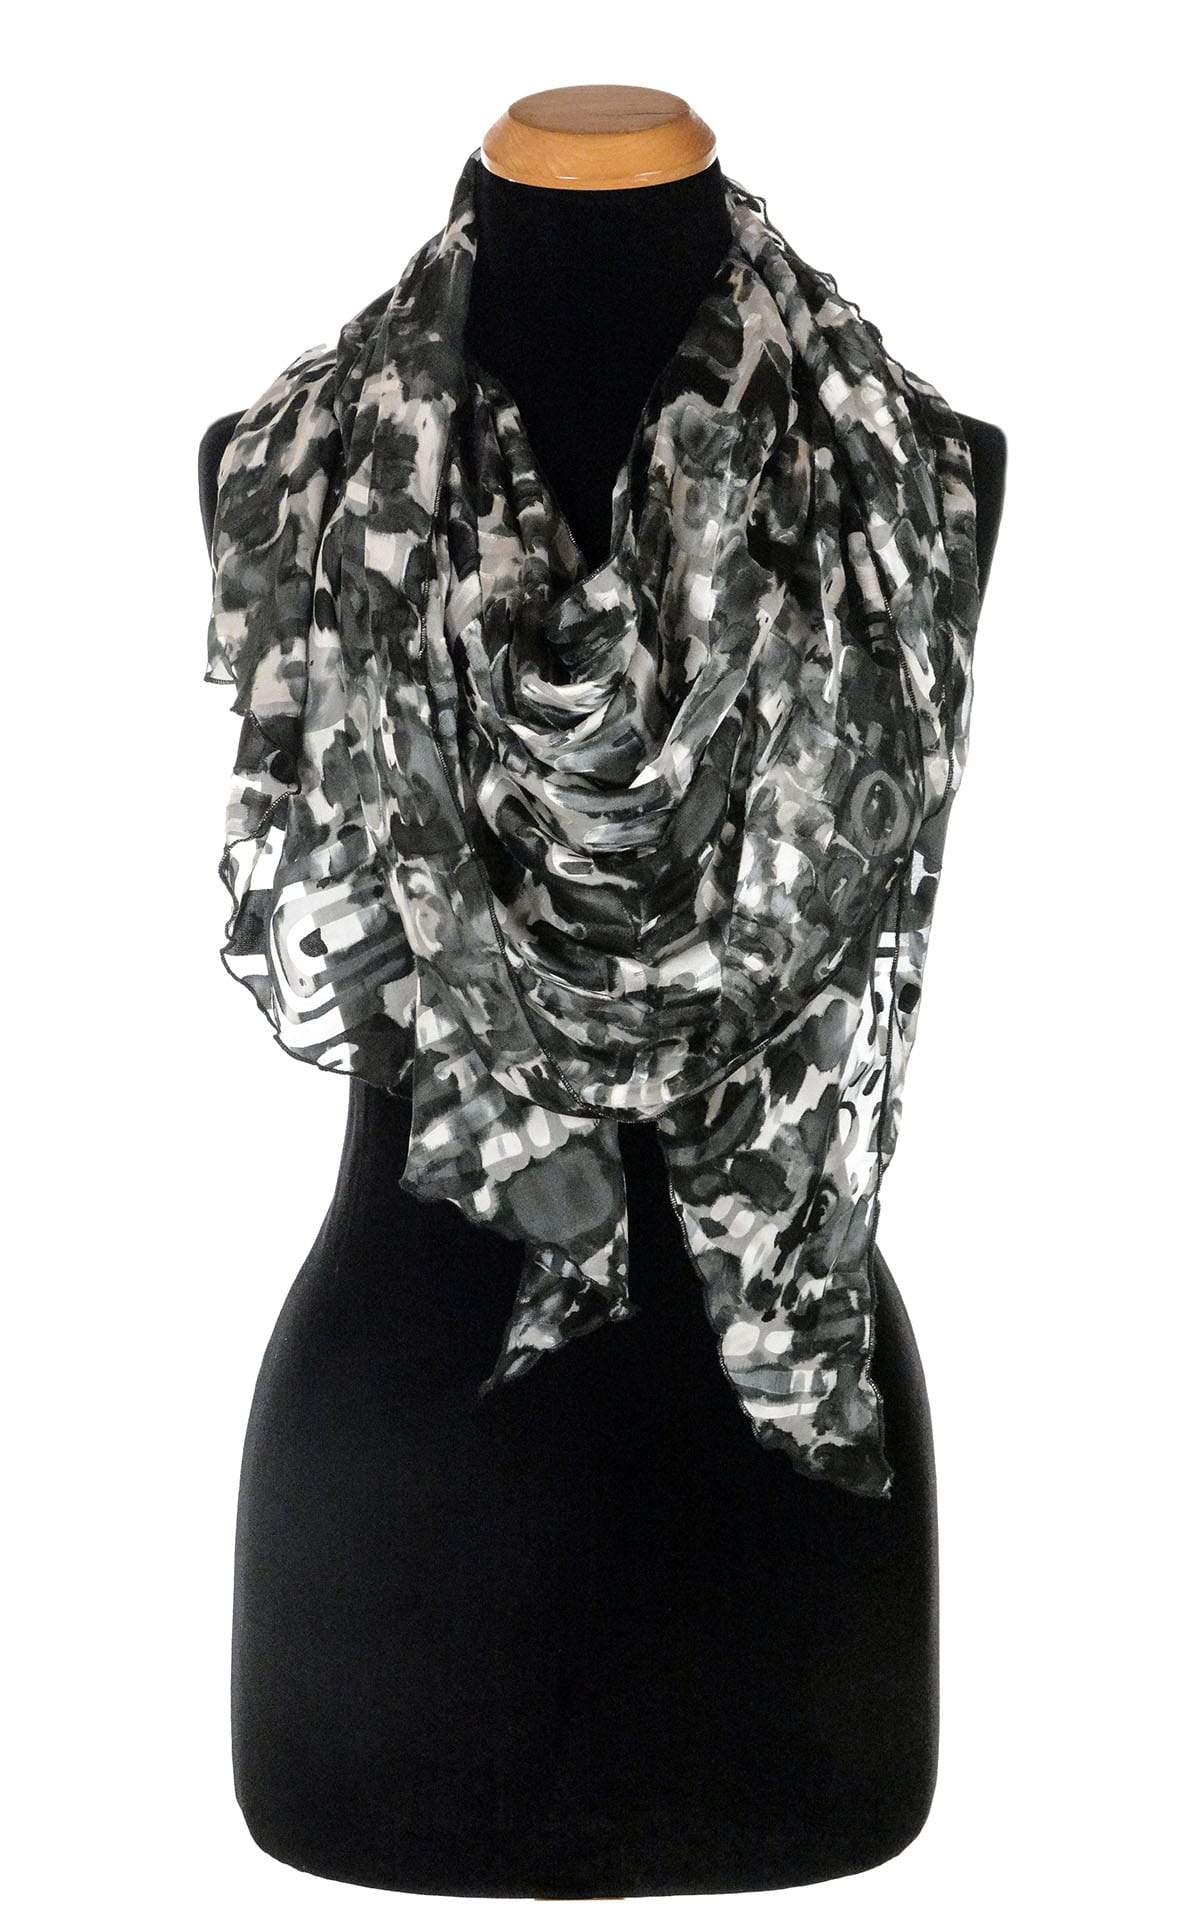 Ladies Large Handkerchief Scarf, Wrap in hand-painted silk on a mannequin | Garden Path in Sand Dollar  black, Gray, and Ivory print | Handmade in Seattle WA | Pandemonium Millinery